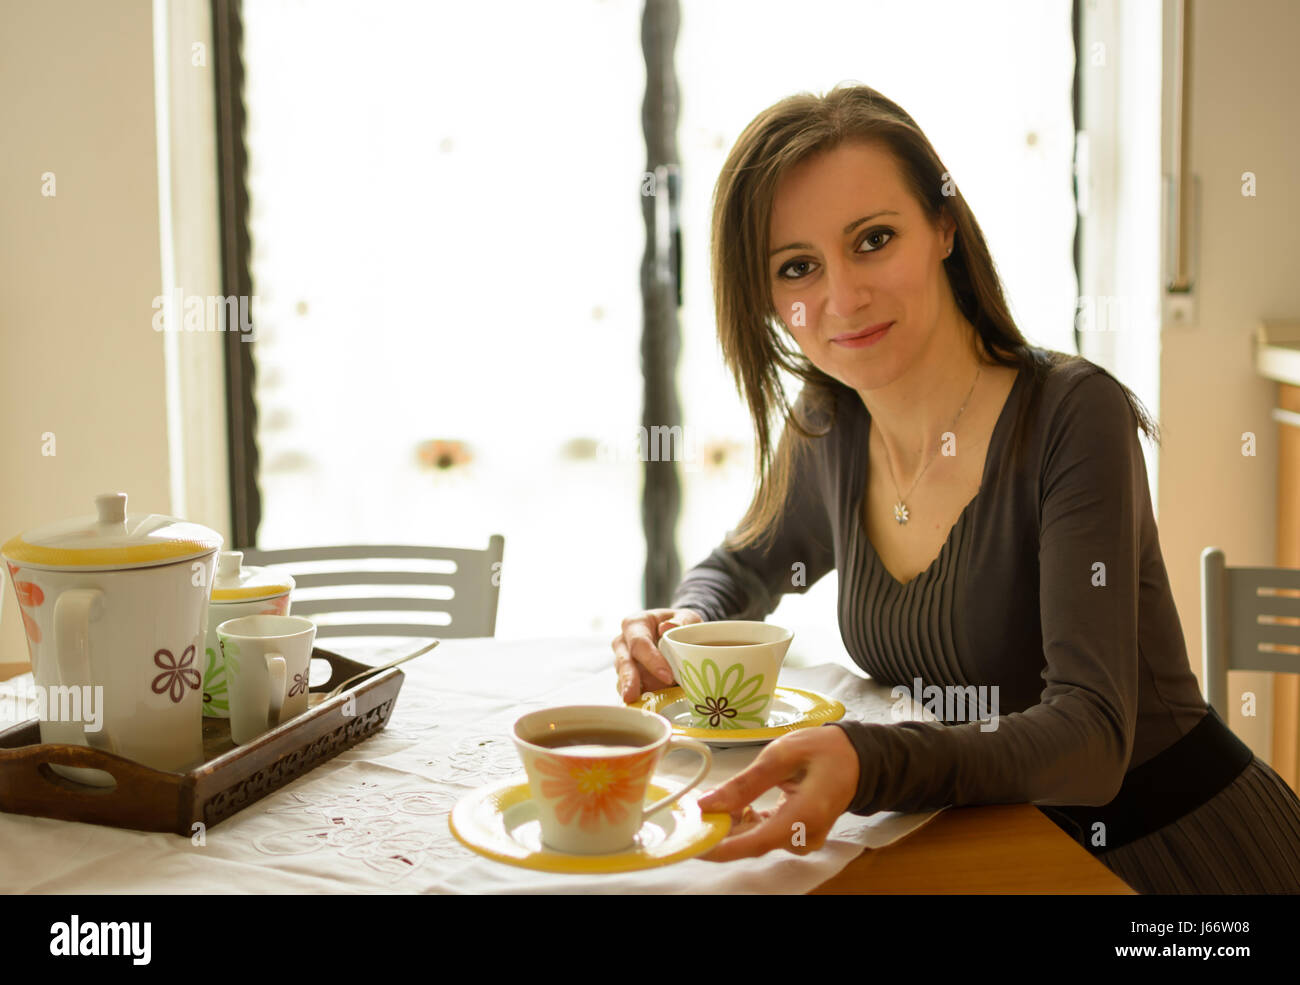 Woman sitting at table offering a cup of tea Stock Photo